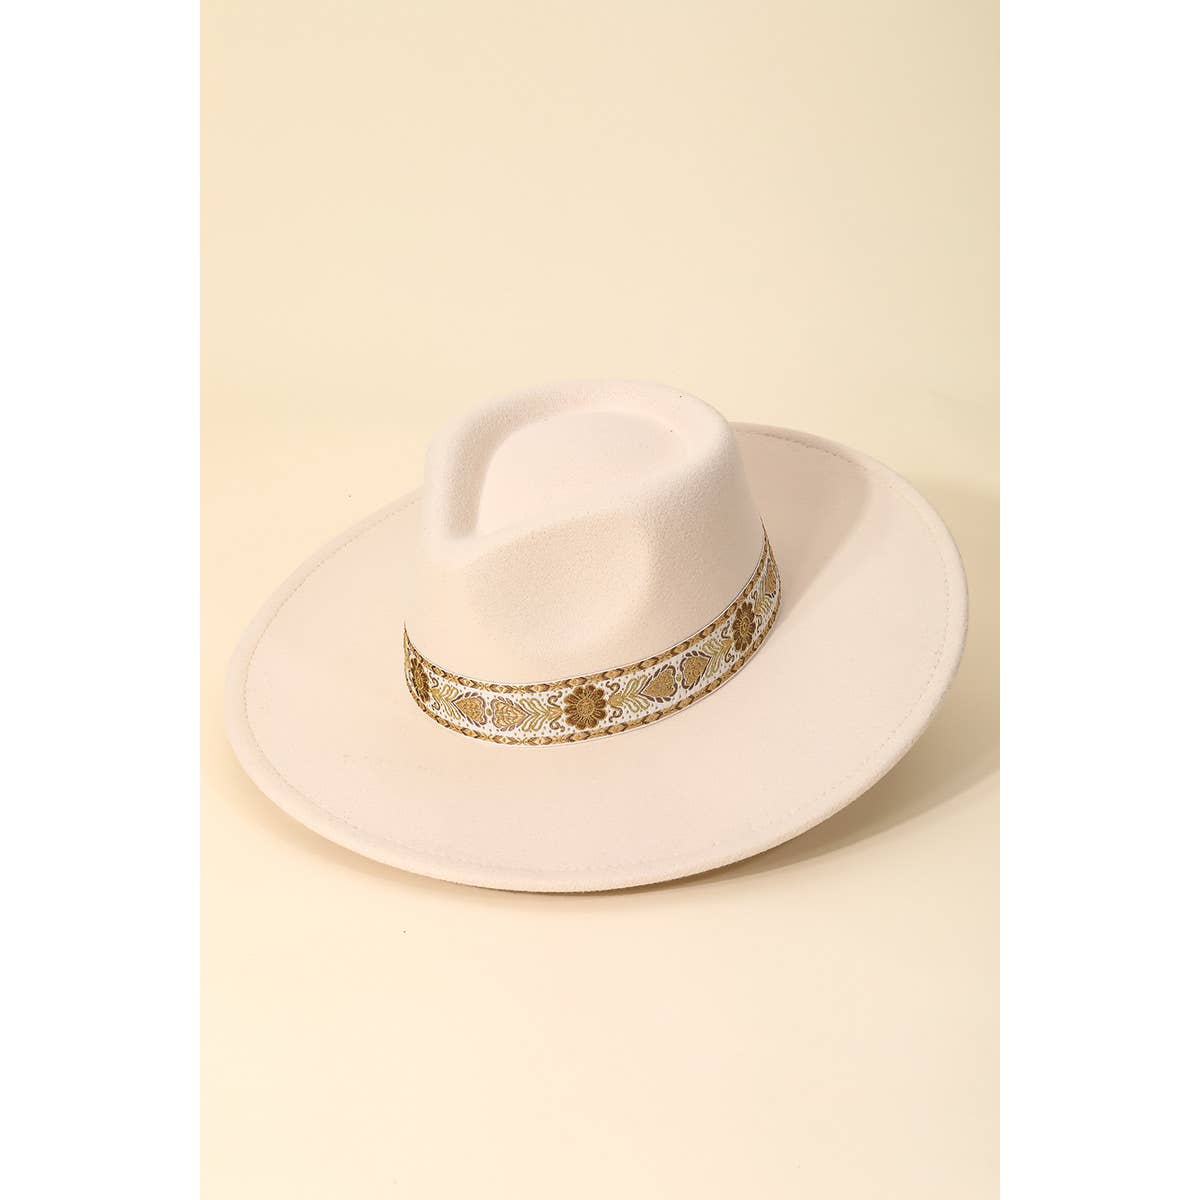 Embroidered Strap Fedora Hat, Ivory